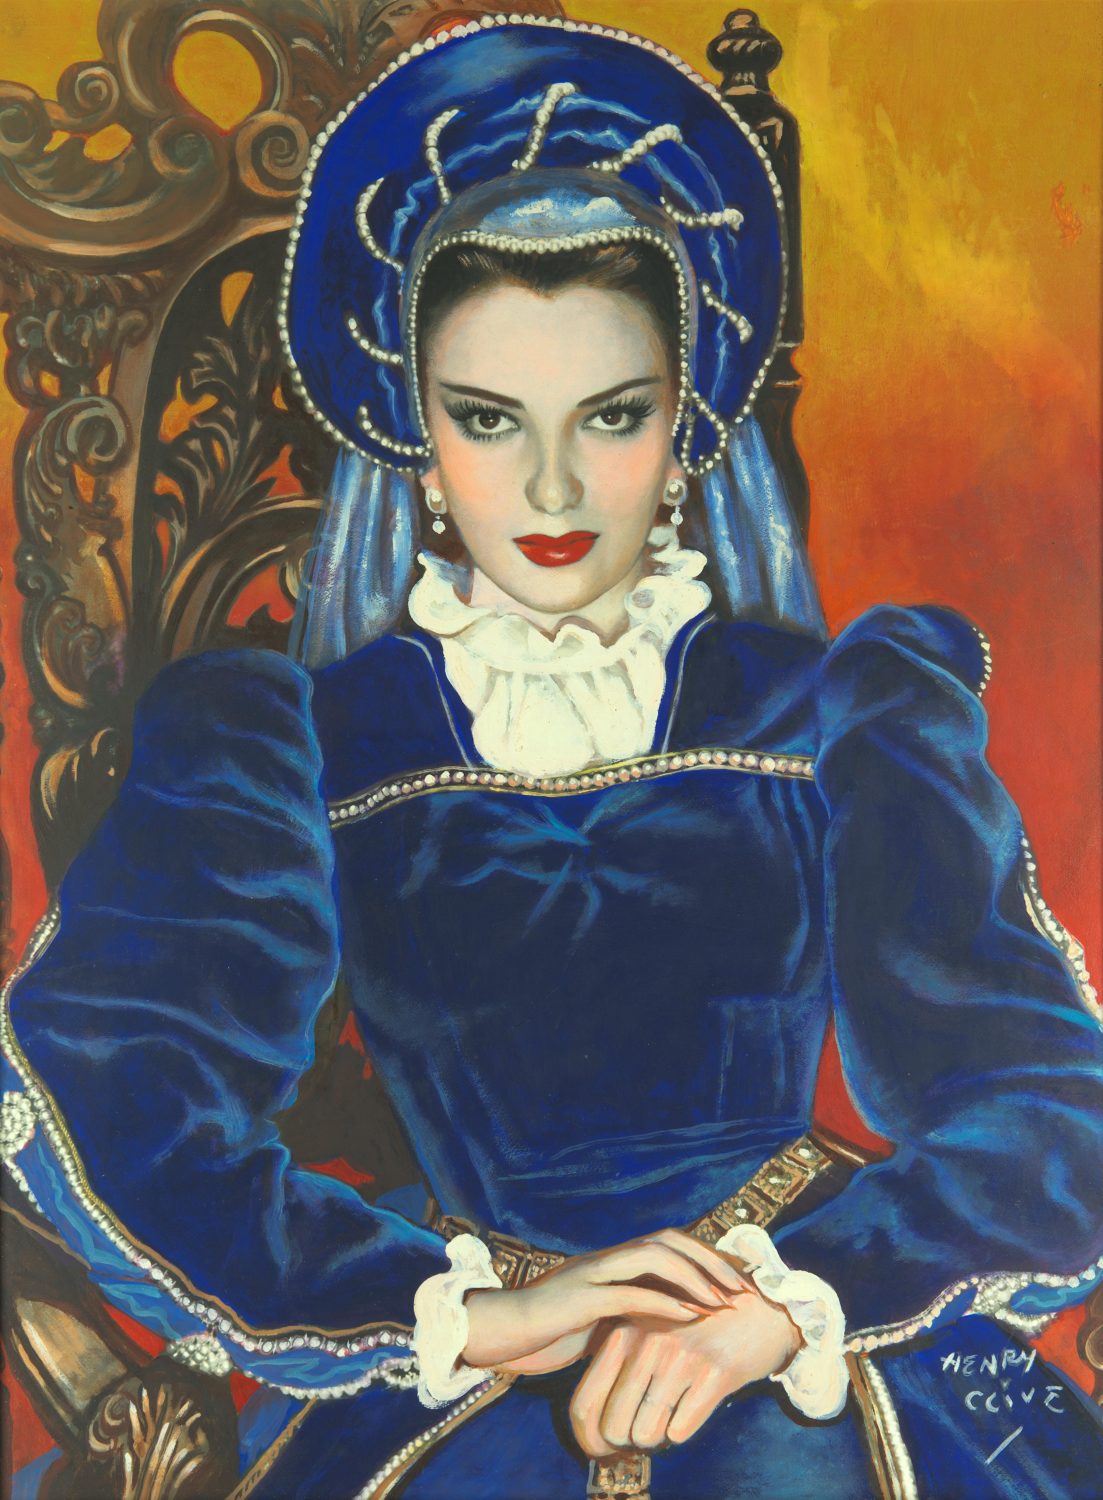 Henry Clive Linda Darnell as Lucretia Borgia 1946 oil on panel. Courtesy of the Hilbert Collection